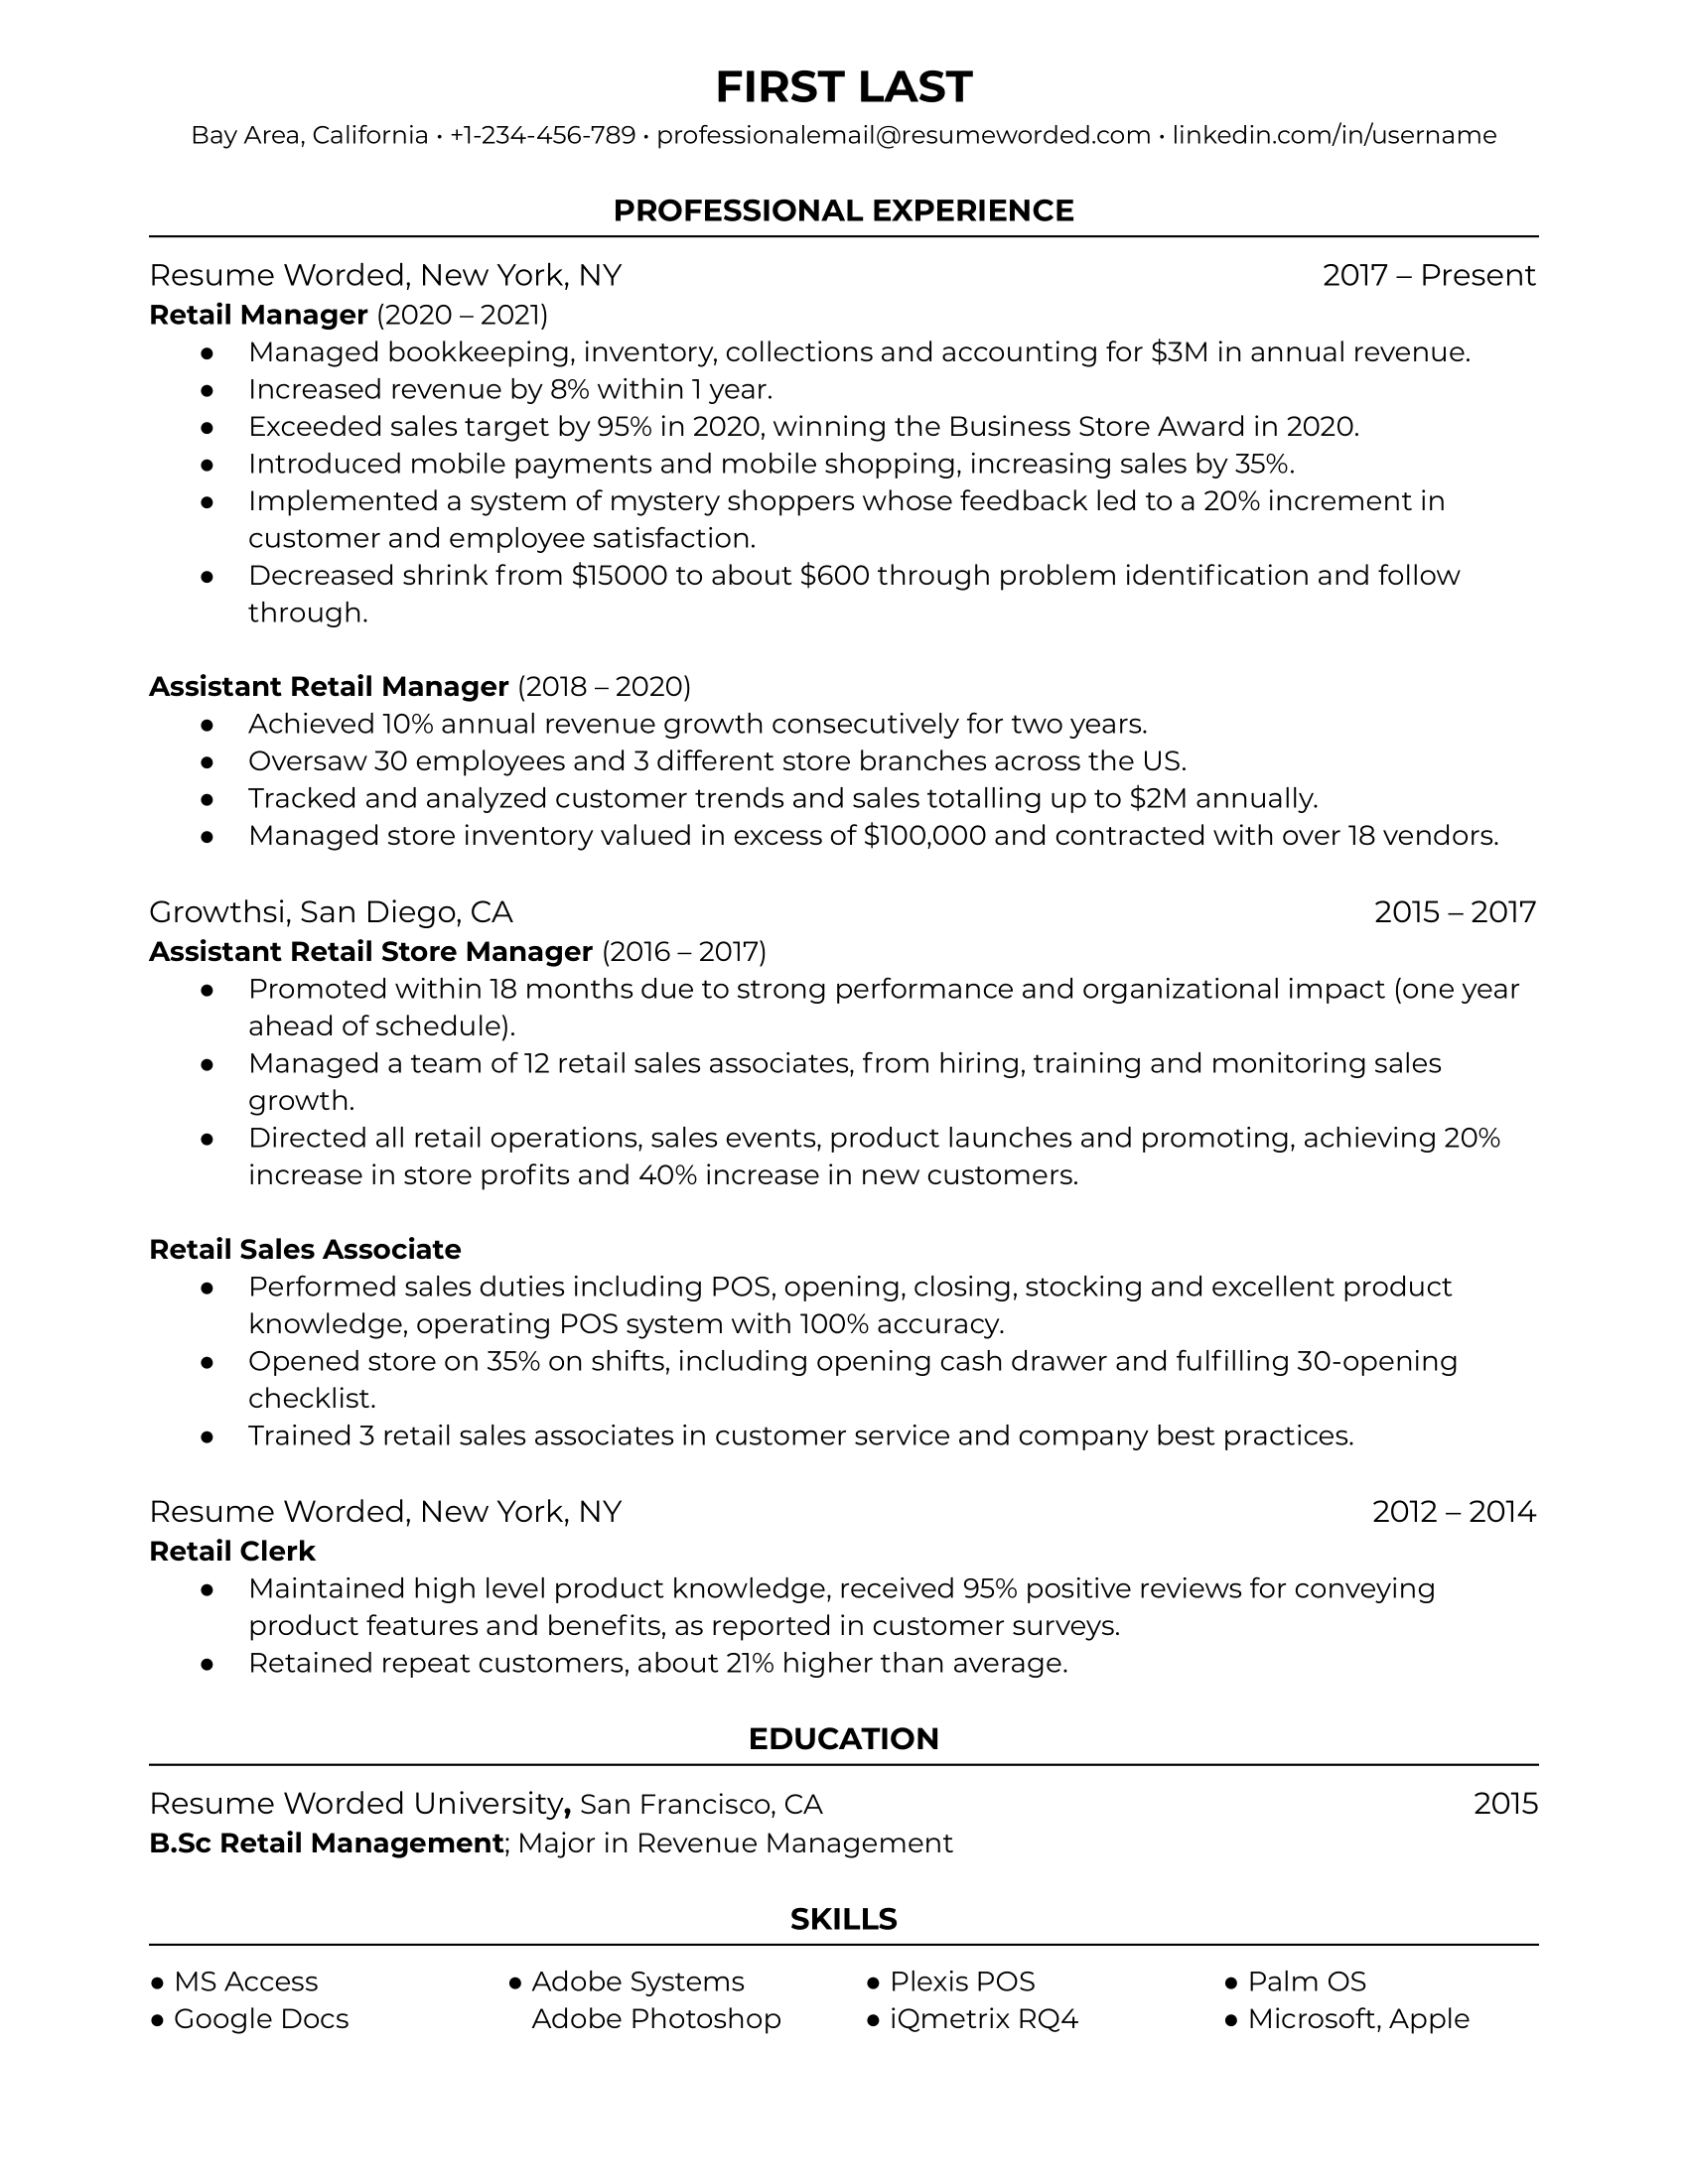 Retail manager resume example template showing career growth through job titles and strong action verbs